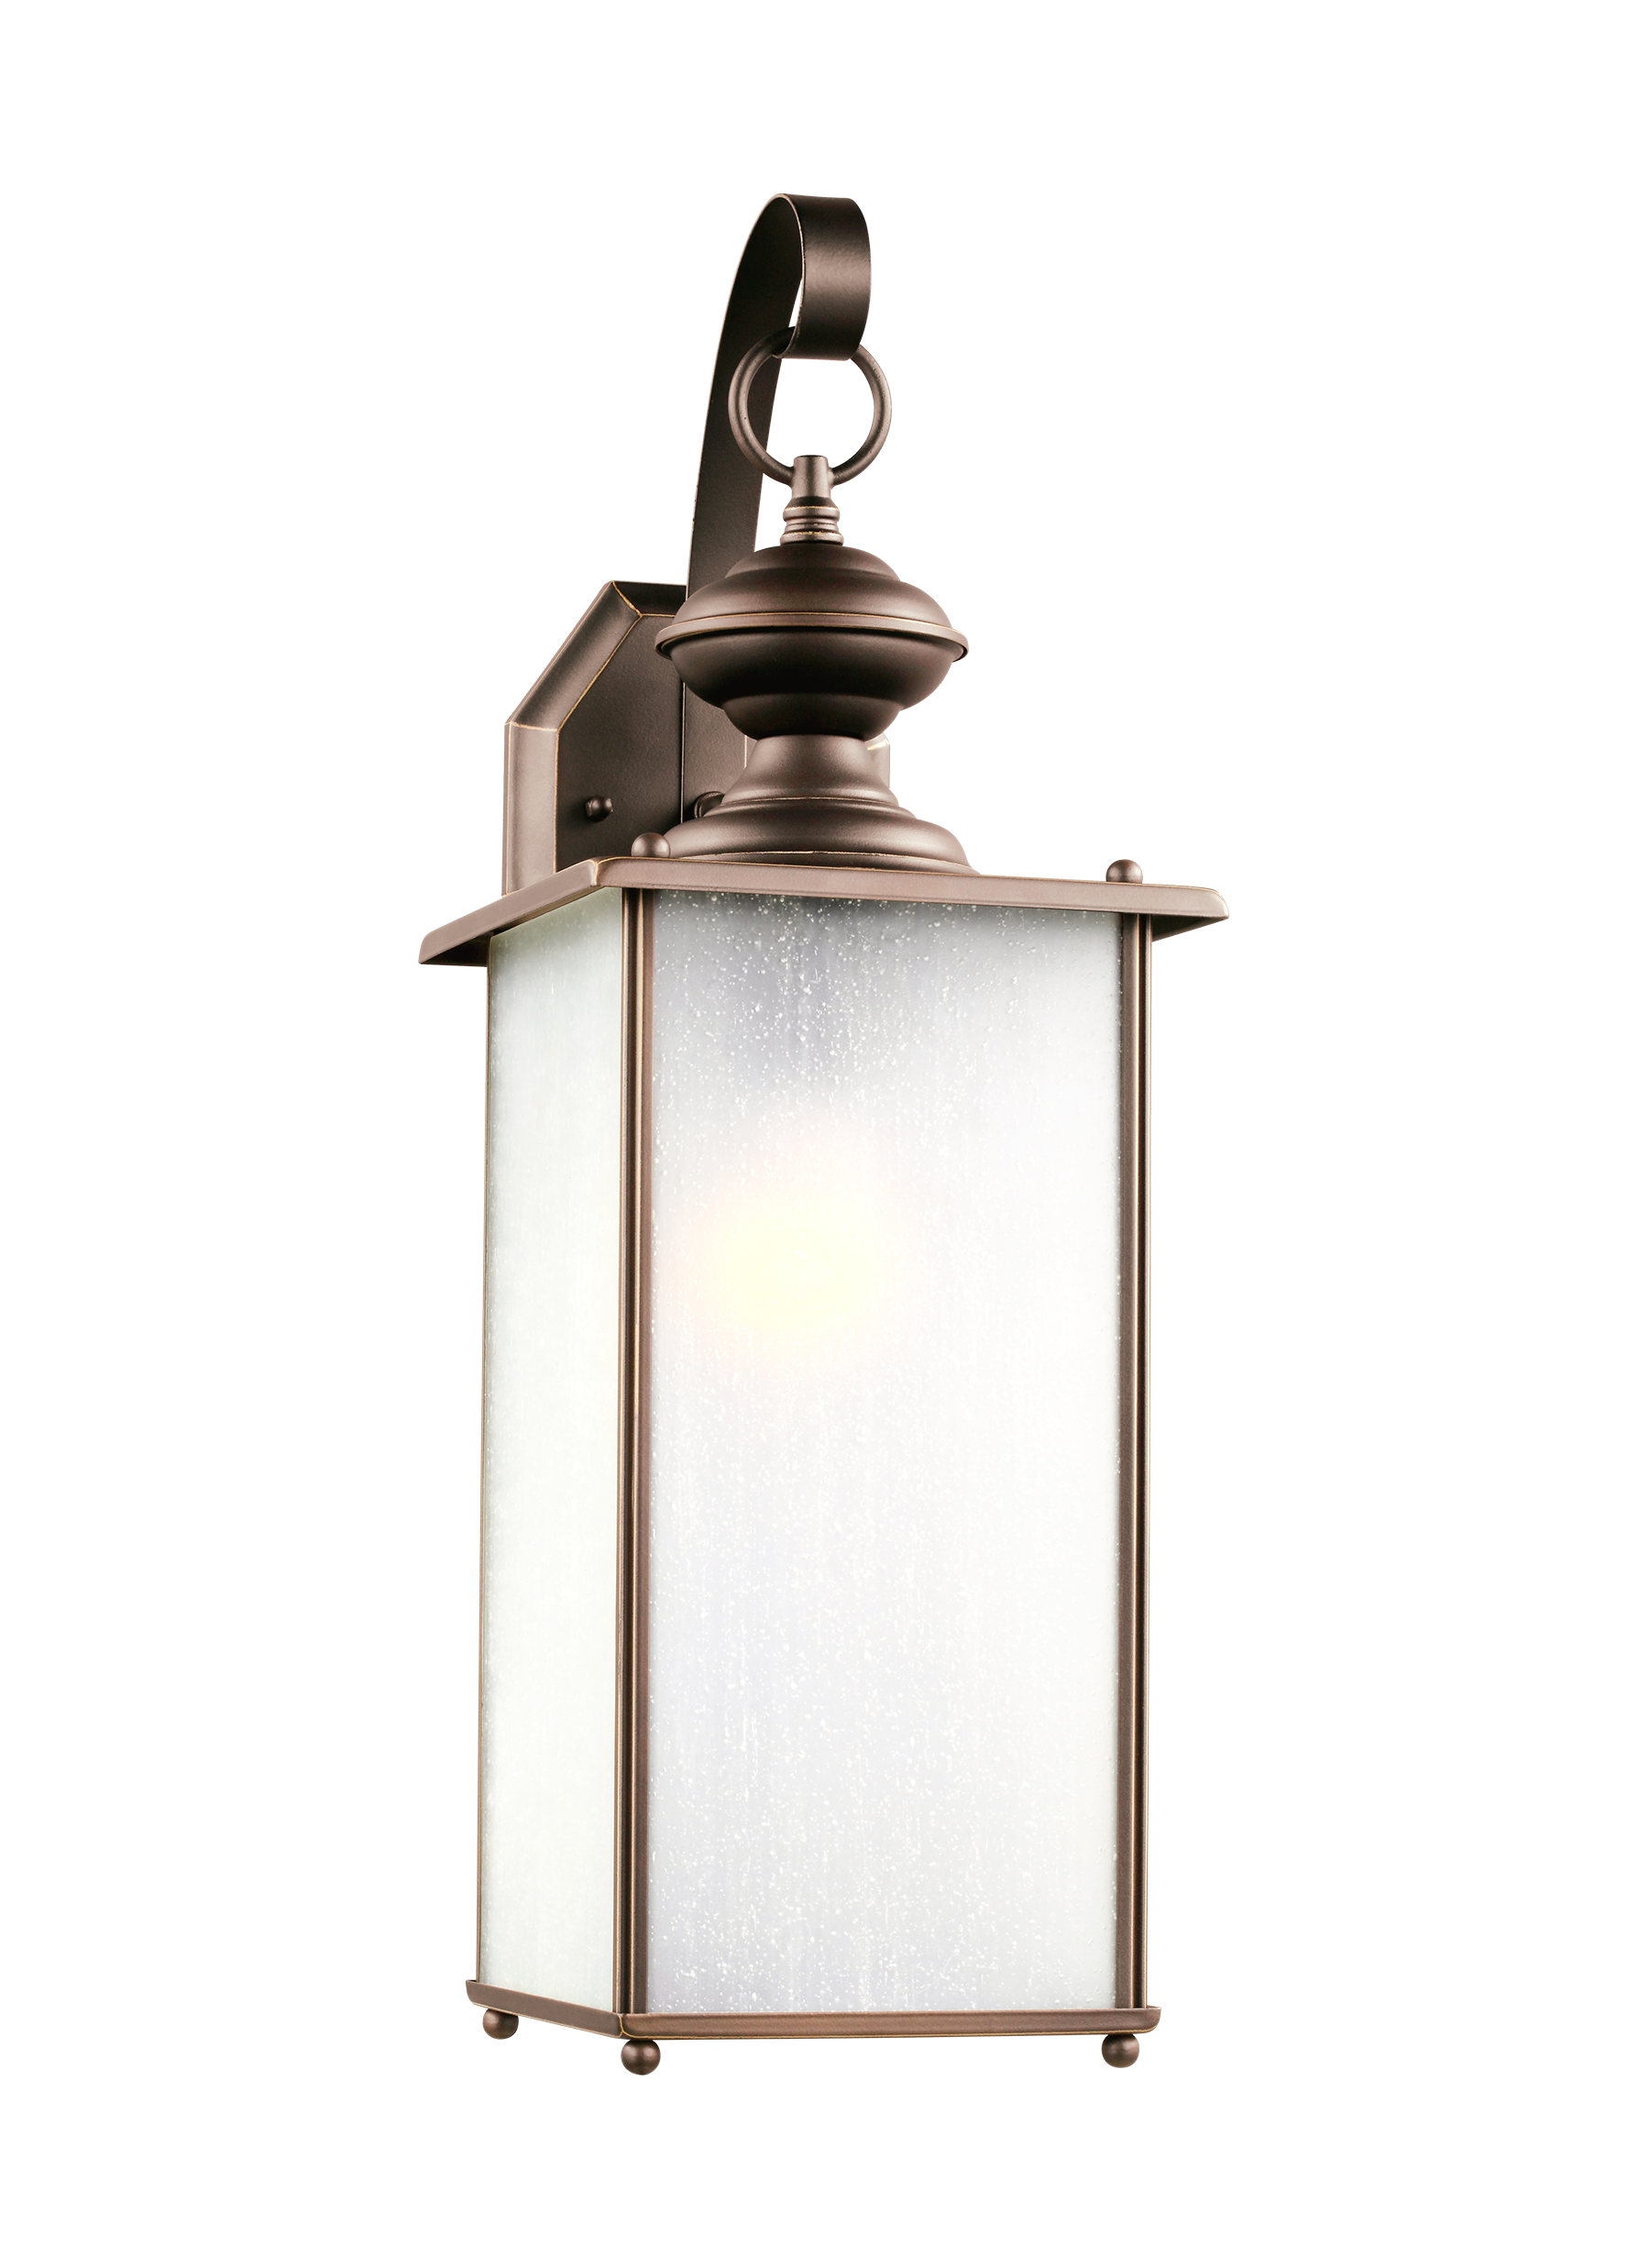 Jamestowne transitional 1-light extra large outdoor exterior wall lantern in antique bronze finish with frosted seeded gla...